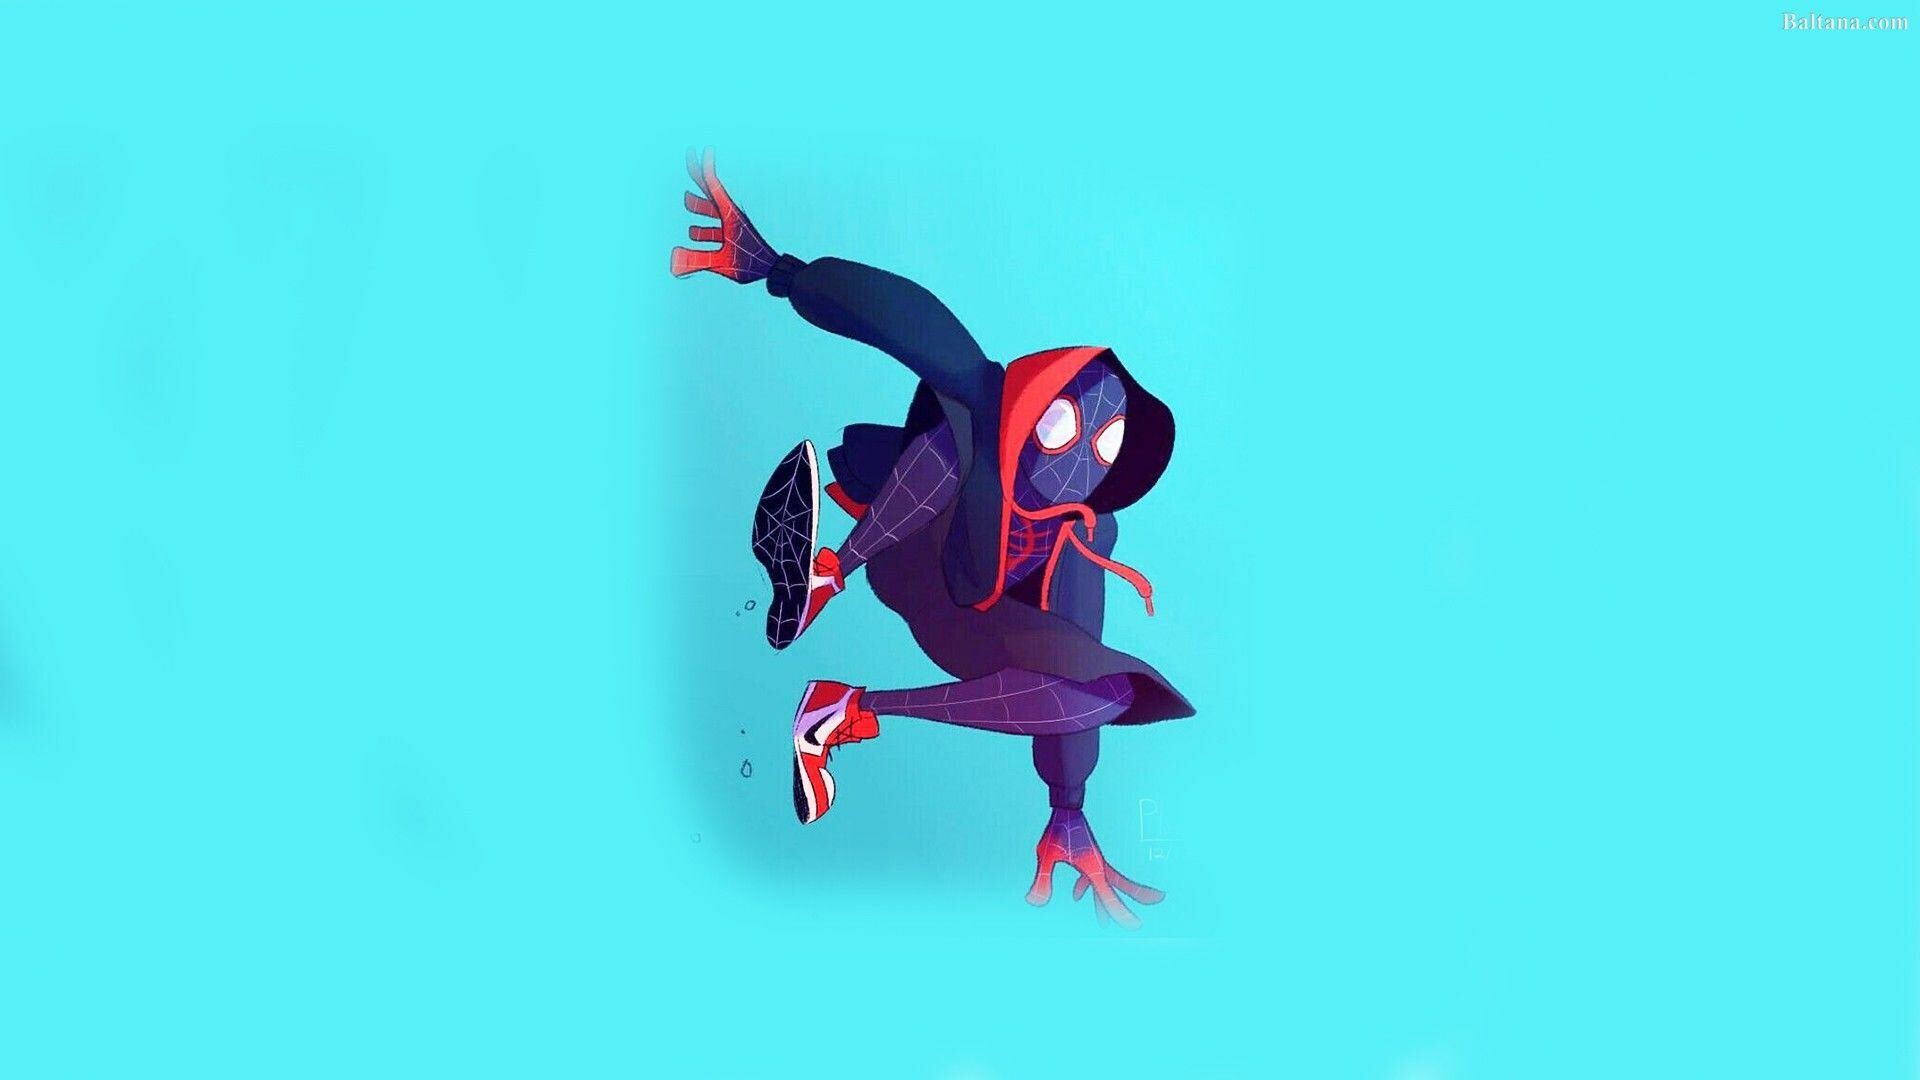 Spider-Man: Into the Spider-Verse: A 2018 American computer-animated superhero film. 1920x1080 Full HD Wallpaper.